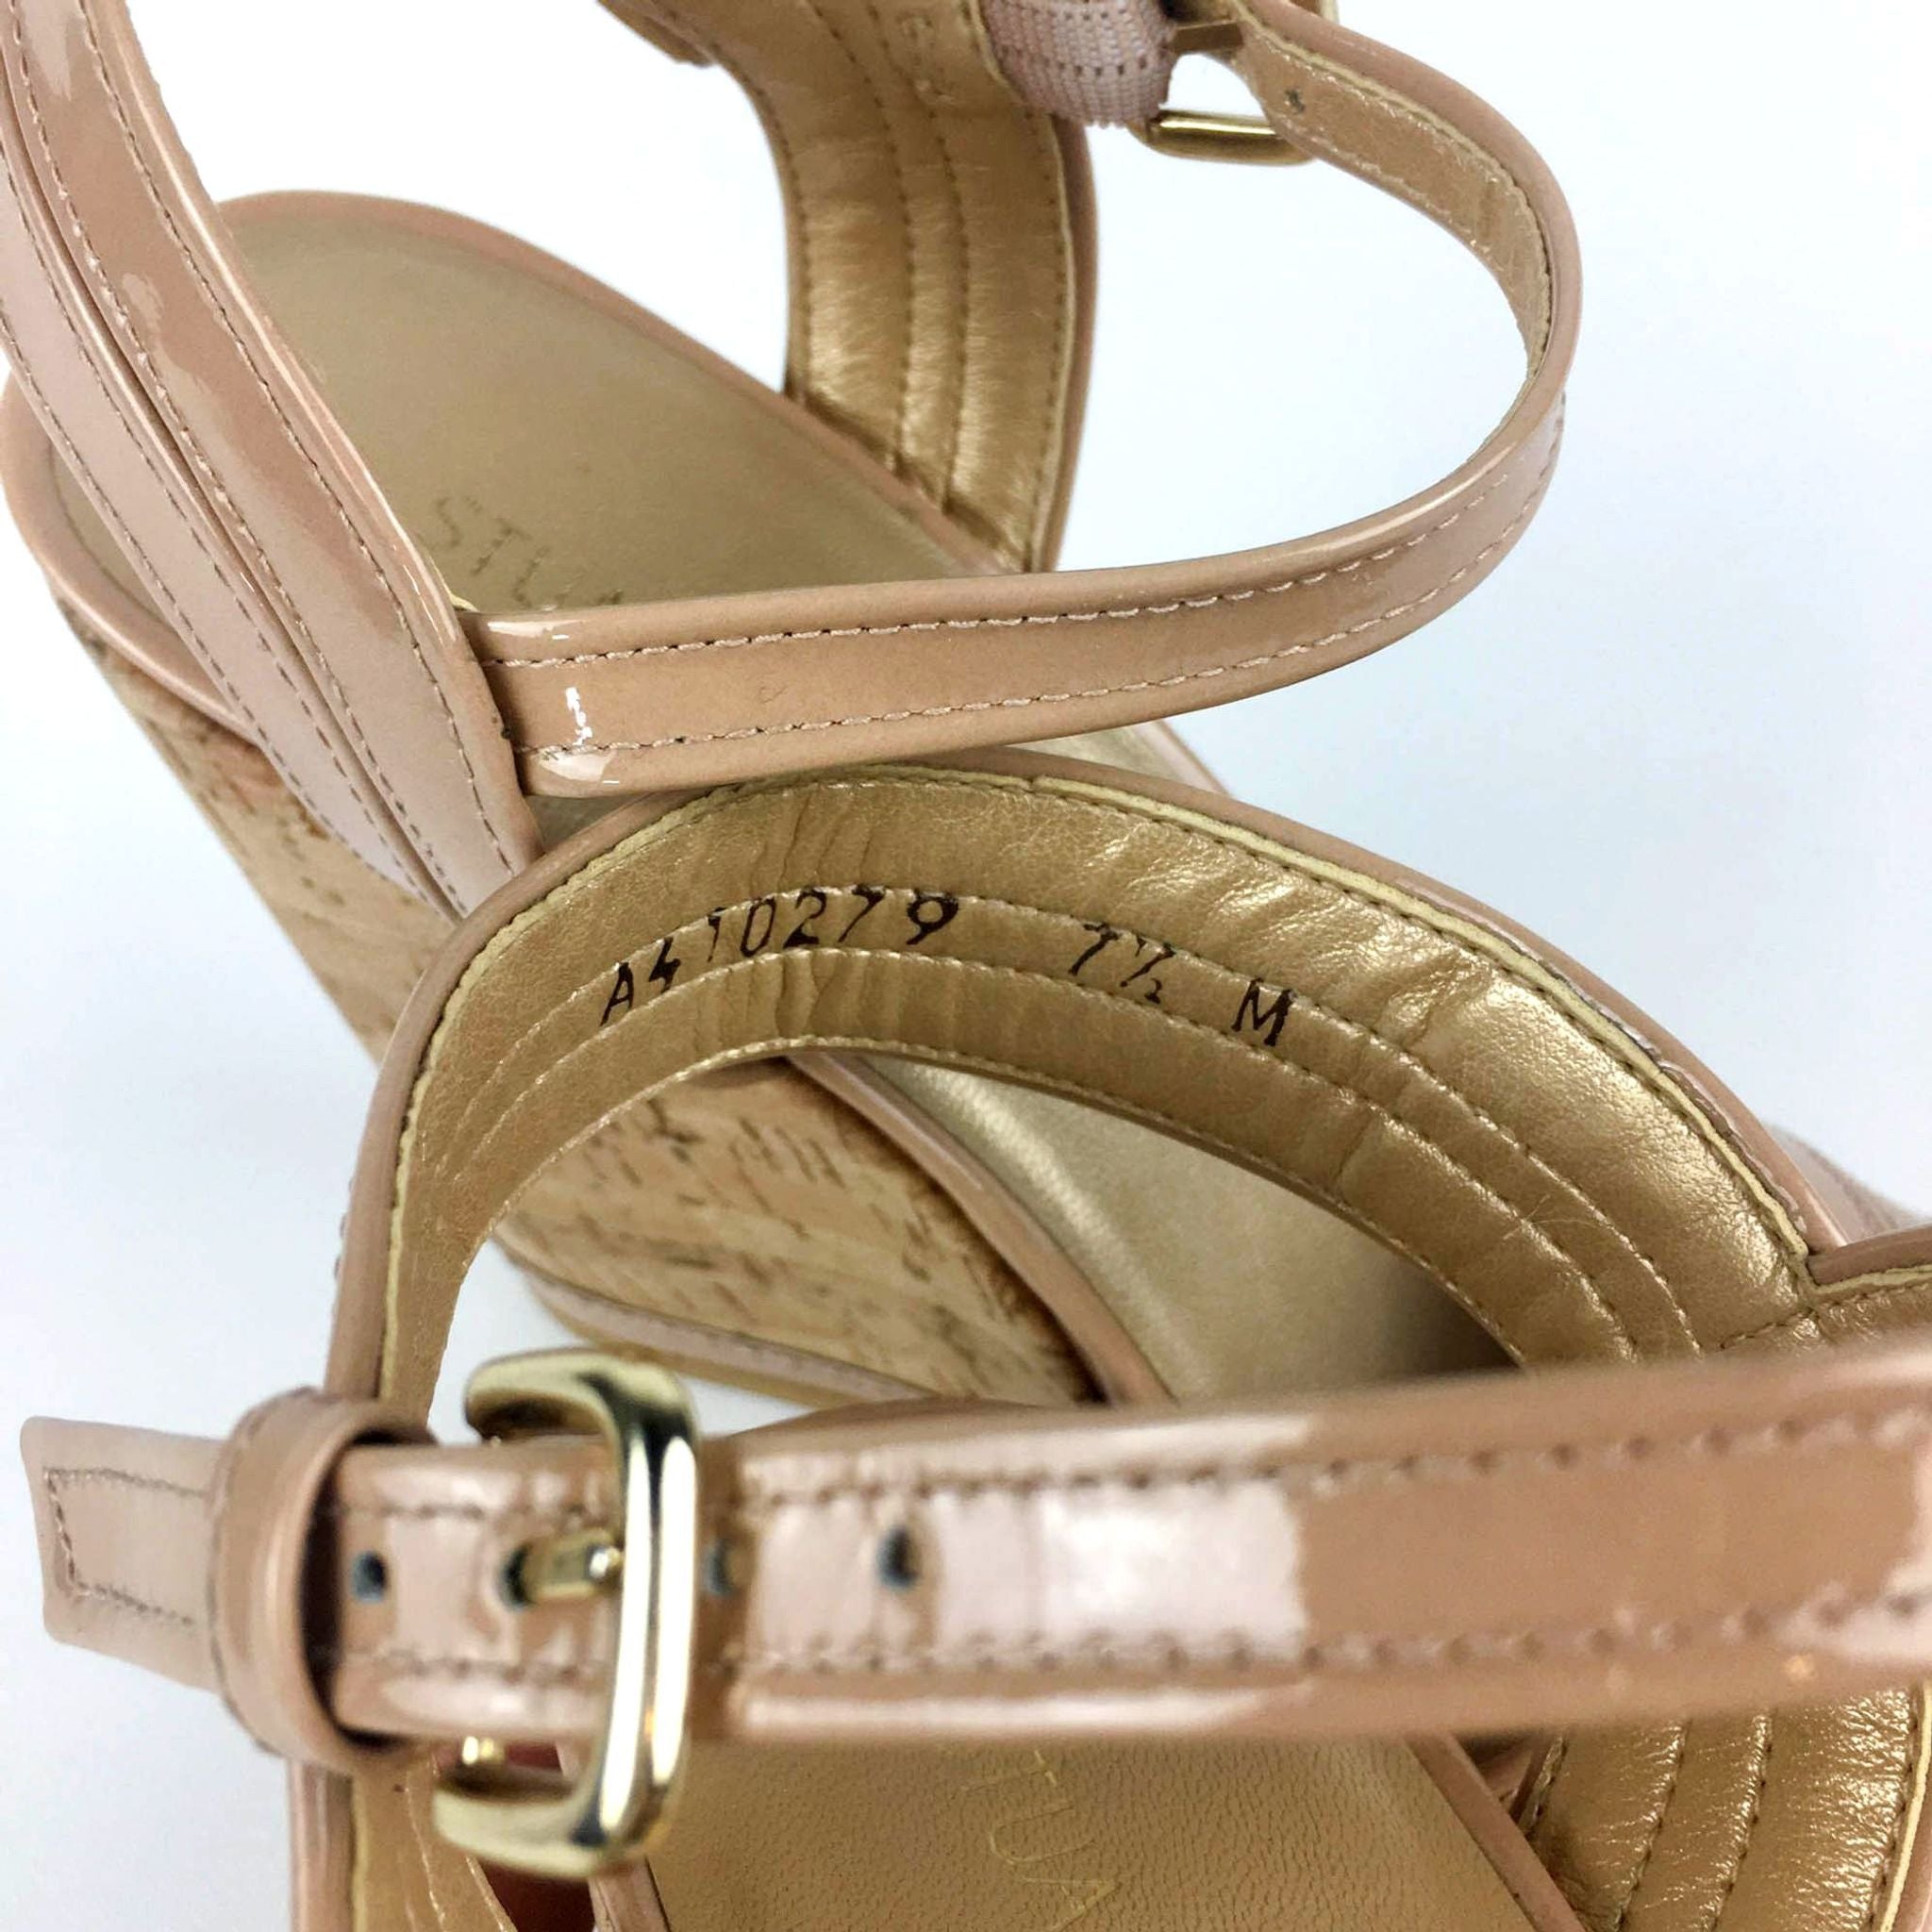 3. Detail view of beige Stuart Weitzman ankle strap wedge heel showing size label and patent leather texture.